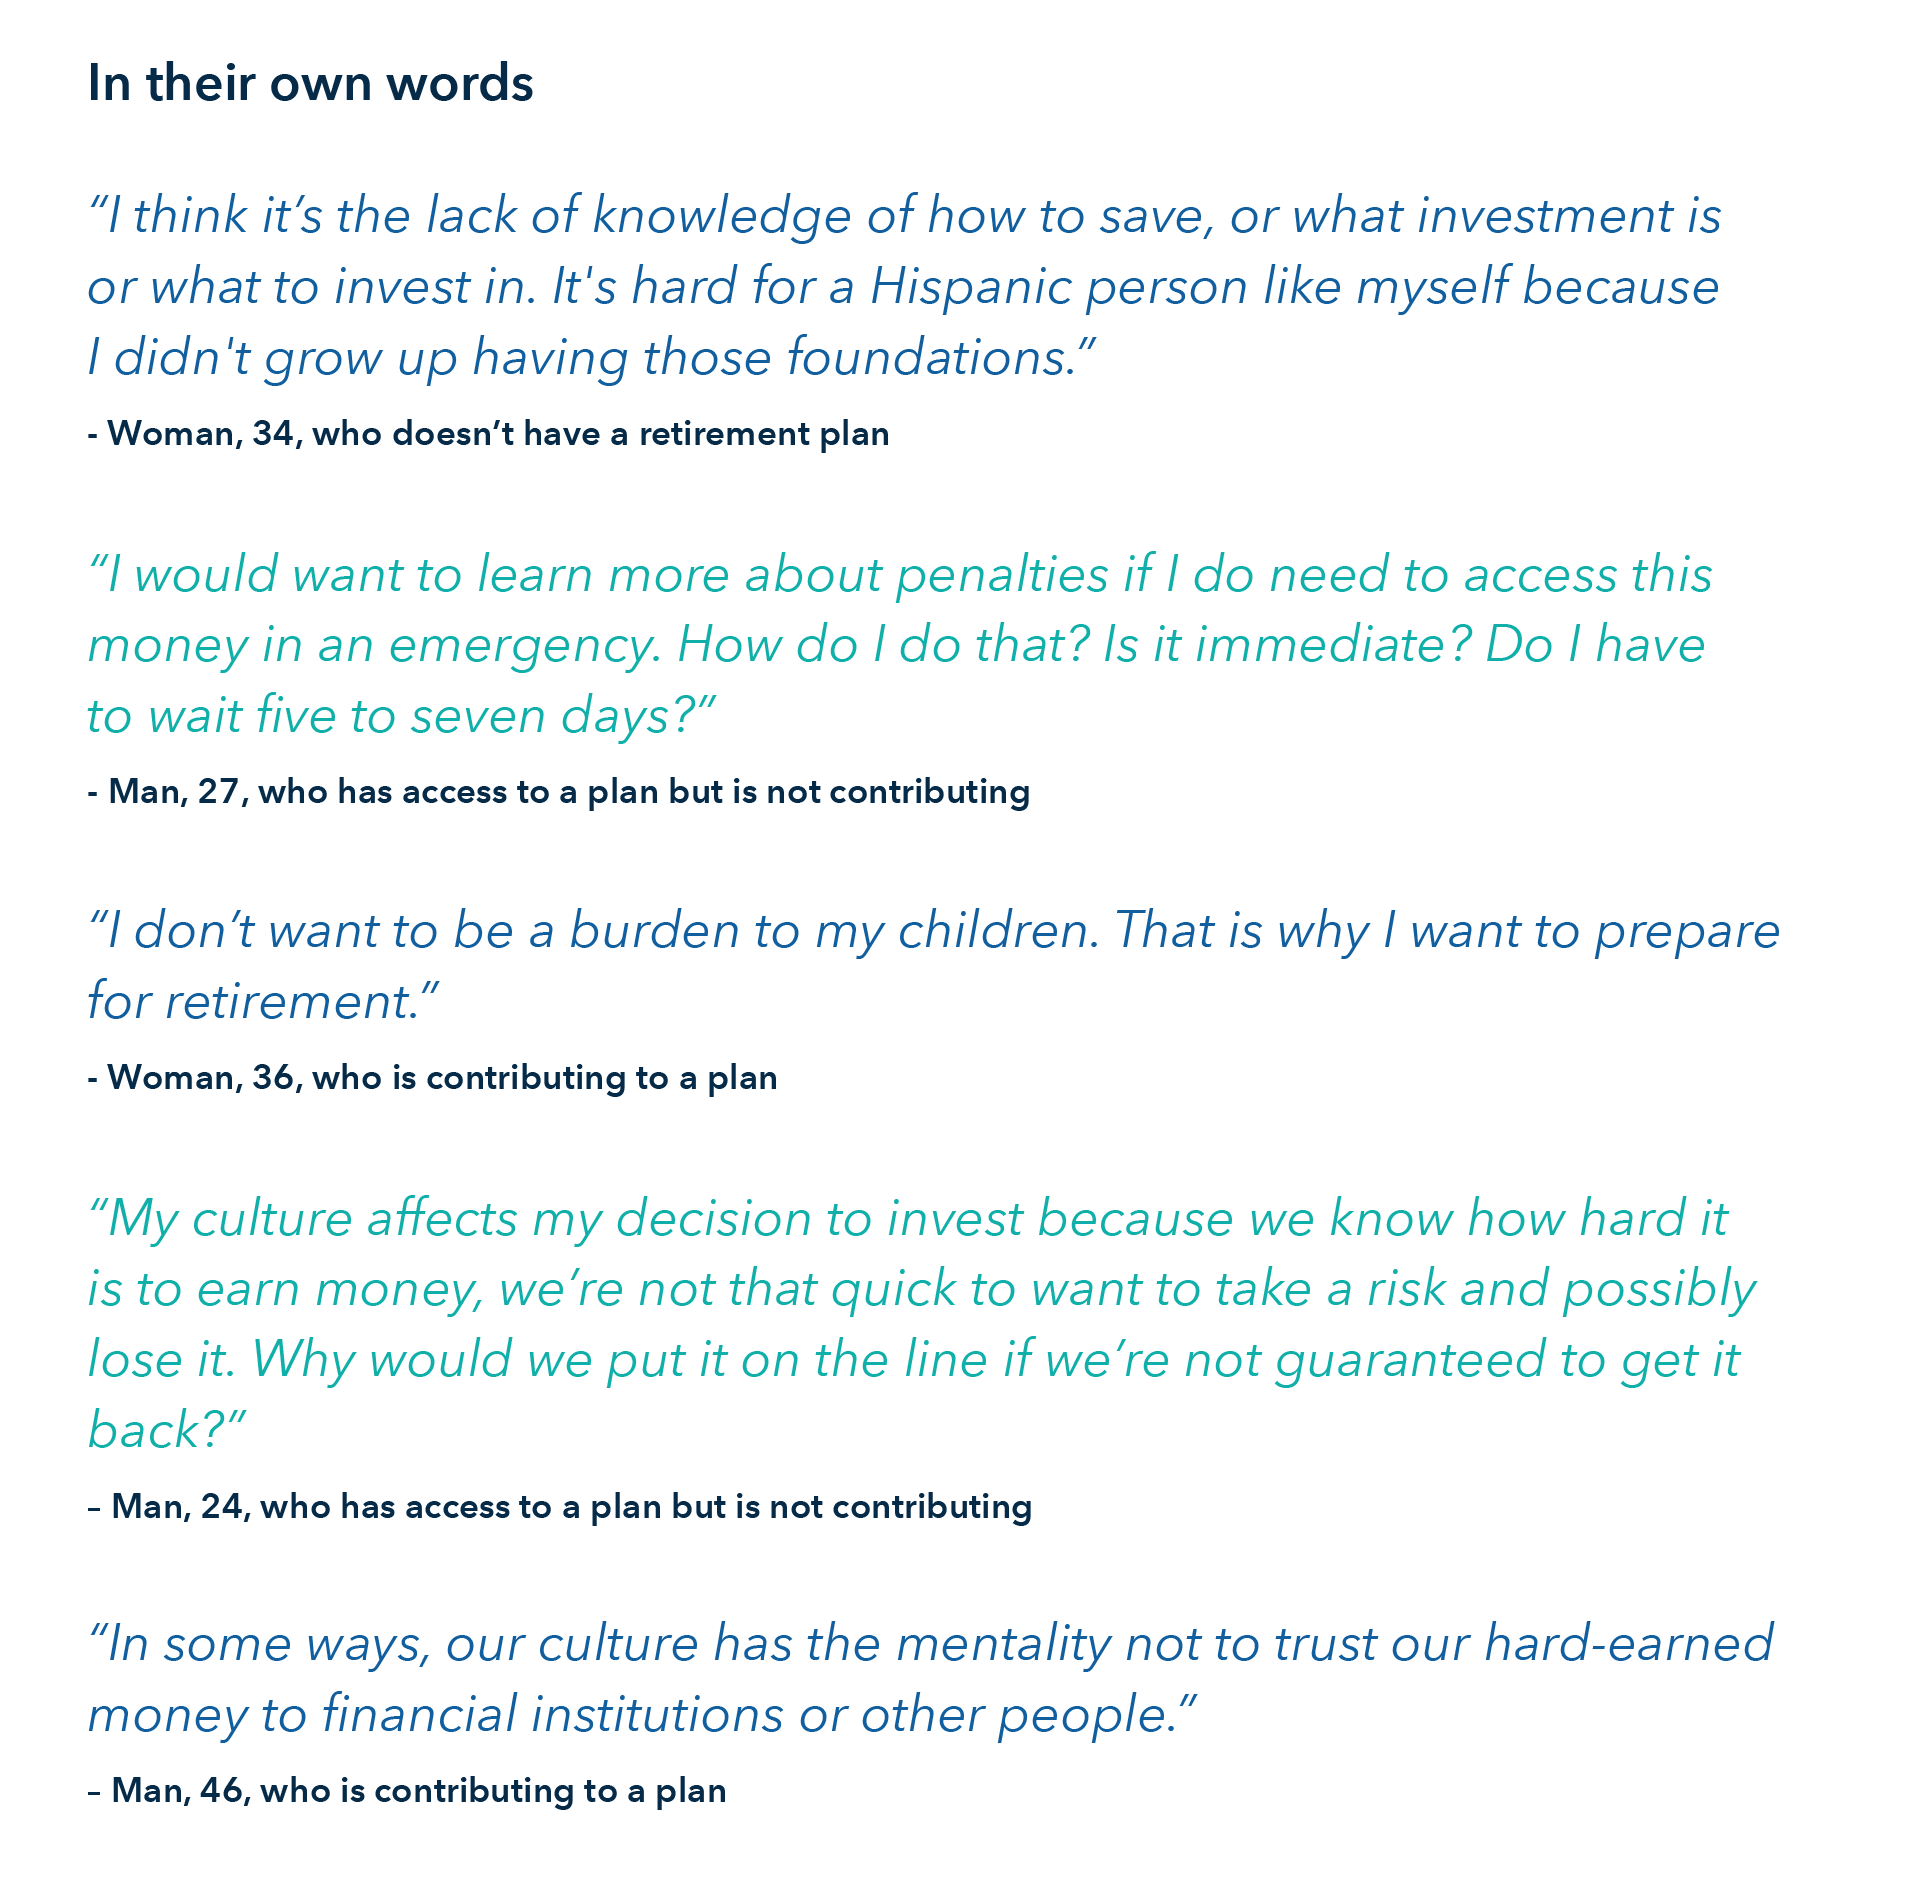 Quotes from respondents of the study. In their own words:  Woman, 34, who doesn’t have a retirement plan: “I think it’s the lack of knowledge of how to save, or what investment is or what to invest in. It's hard for a Hispanic person like myself because I didn't grow up having those foundations.” Man, 27, who has access to a plan but is not contributing: “I would want to learn more about penalties if I do need to access this money in an emergency. How do I do that? Is it immediate? Do I have to wait five to seven days?” Woman, 36, who is contributing to a plan: “I don’t want to be a burden to my children. That is why I want to prepare for retirement.” Man, 24, who has access to a plan but is not contributing: “My culture affects my decision to invest because we know how hard it is to earn money, we’re not that quick to want to take a risk and possibly lose it. Why would we put it on the line if we’re not guaranteed to get it back?” Man, 46, who is contributing to a plan: “In some ways, our culture has the mentality not to trust our hard-earned money to financial institutions or other people.”